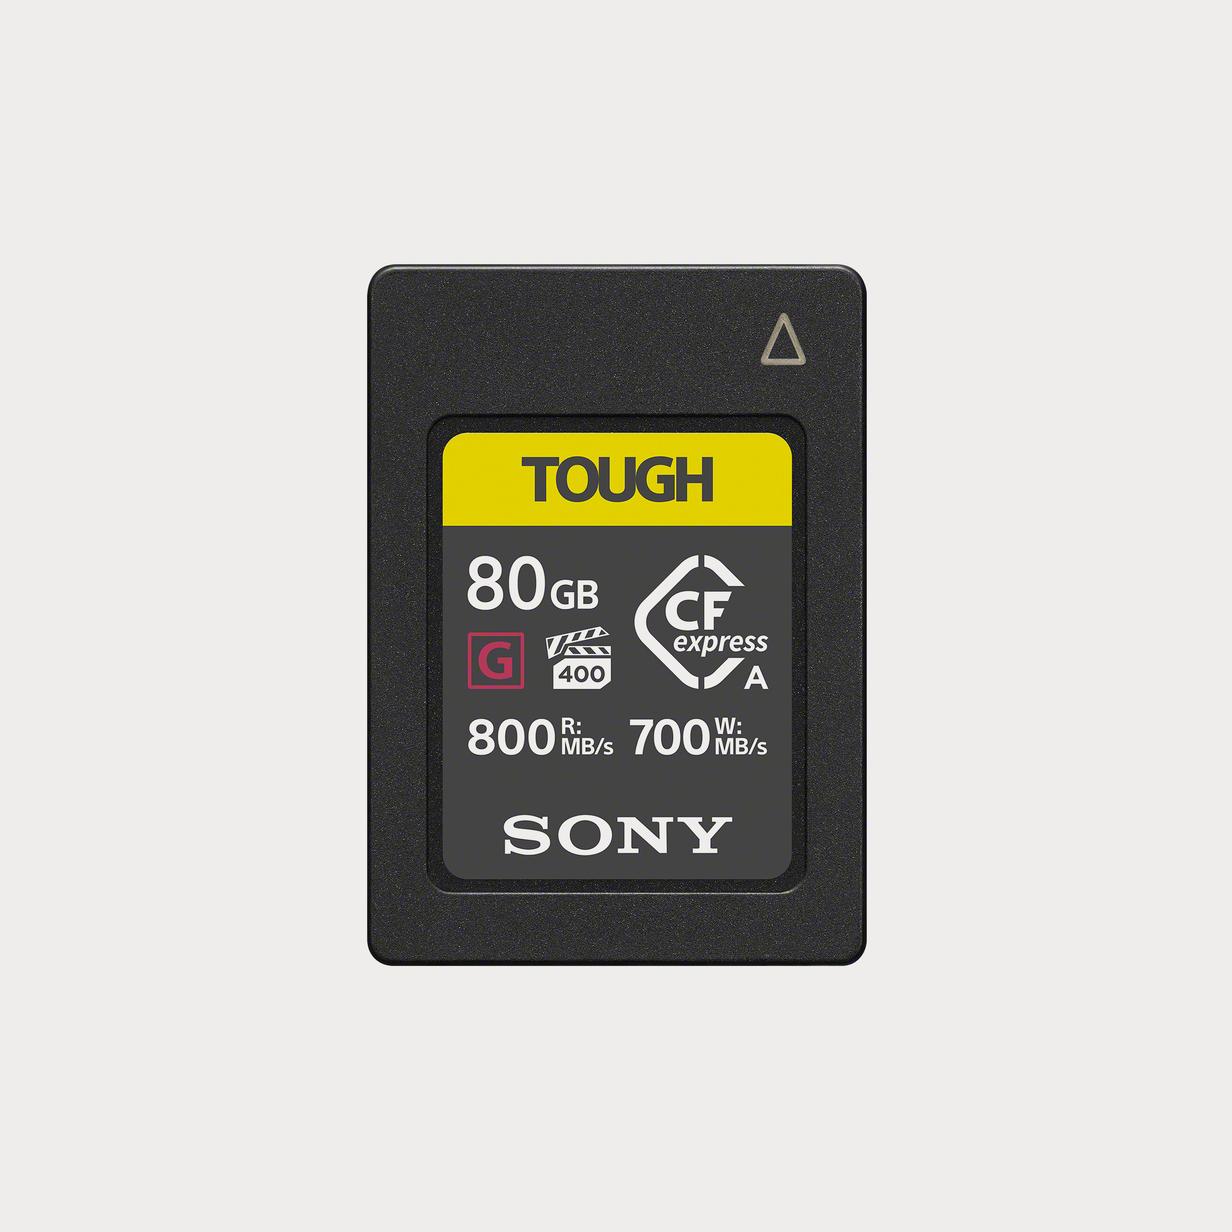 Moment sony CEAG80 T C Fexpress Type A memory Card 80 GB 01